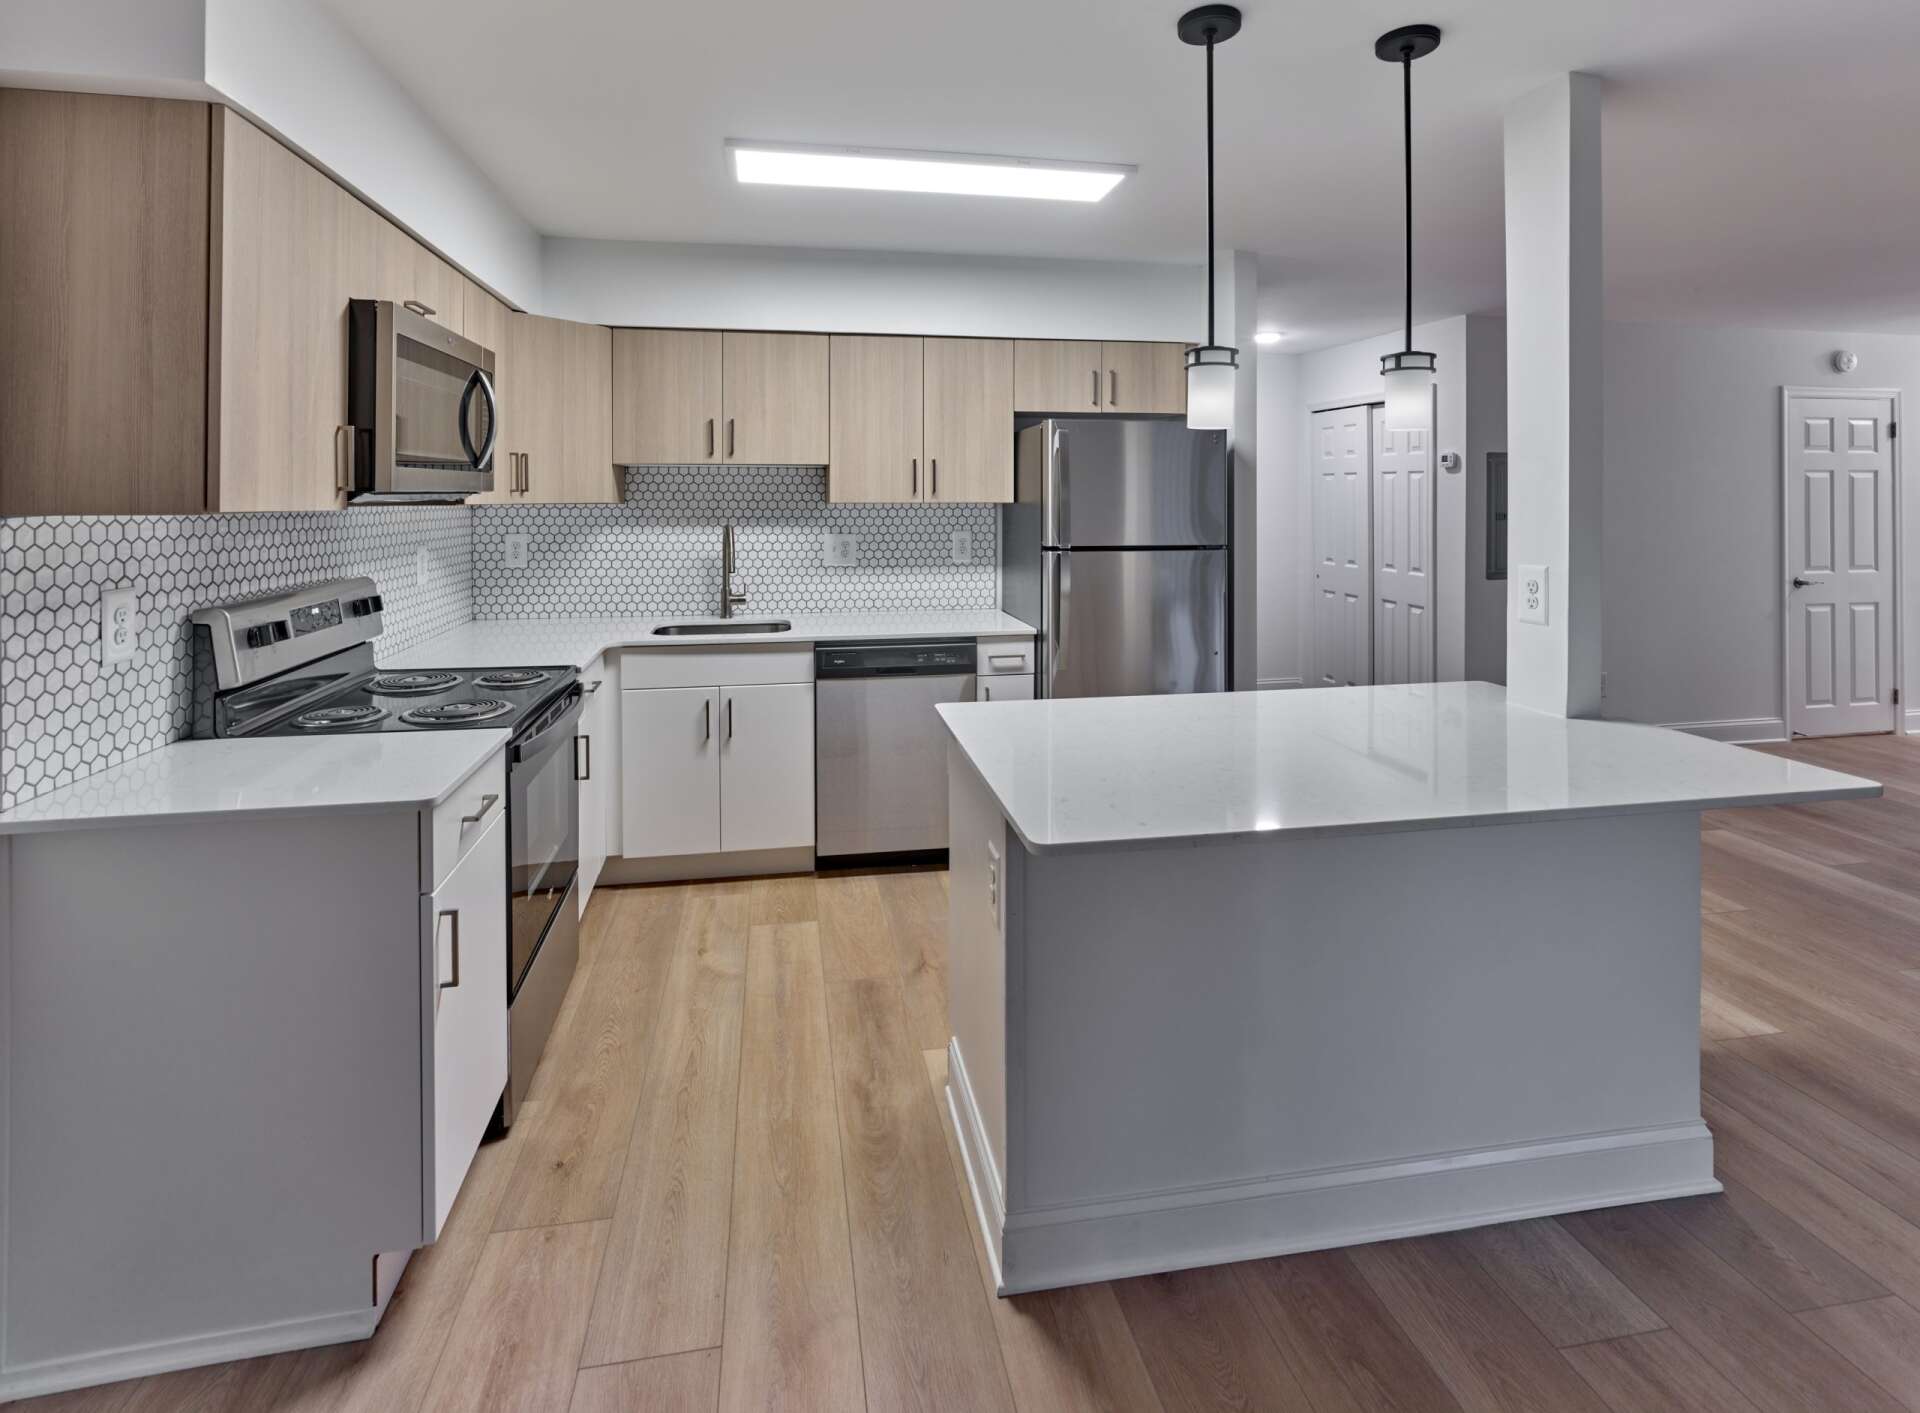 Renovated apartment kitchen with white cabinets, hardwood floors, and an island